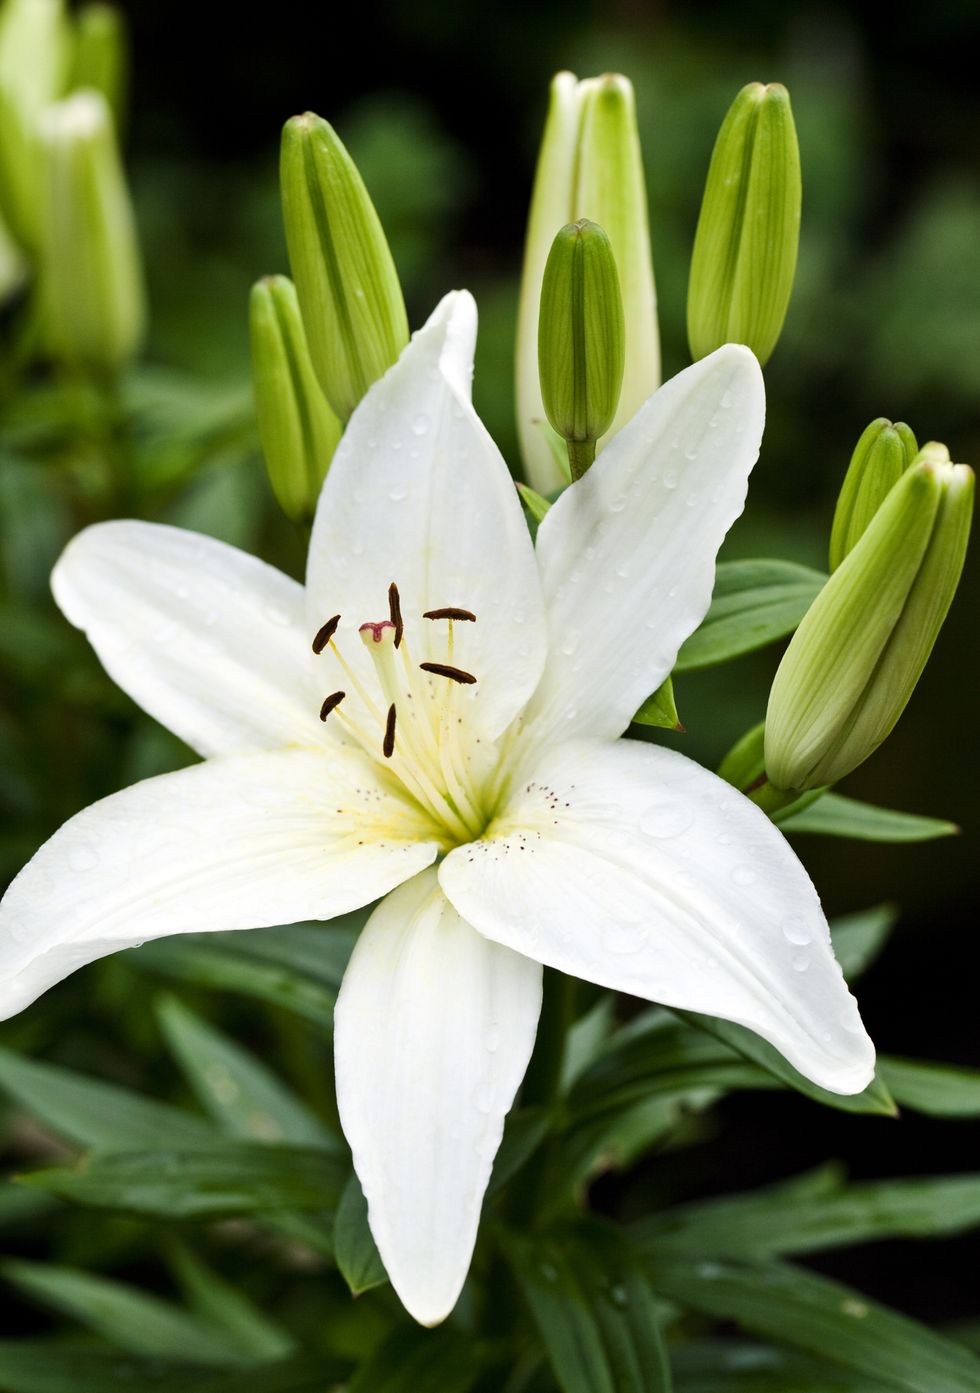 Petal, Plant, Flower, White, Lily, Flowering plant, Botany, Terrestrial plant, Spring, Lily family, 